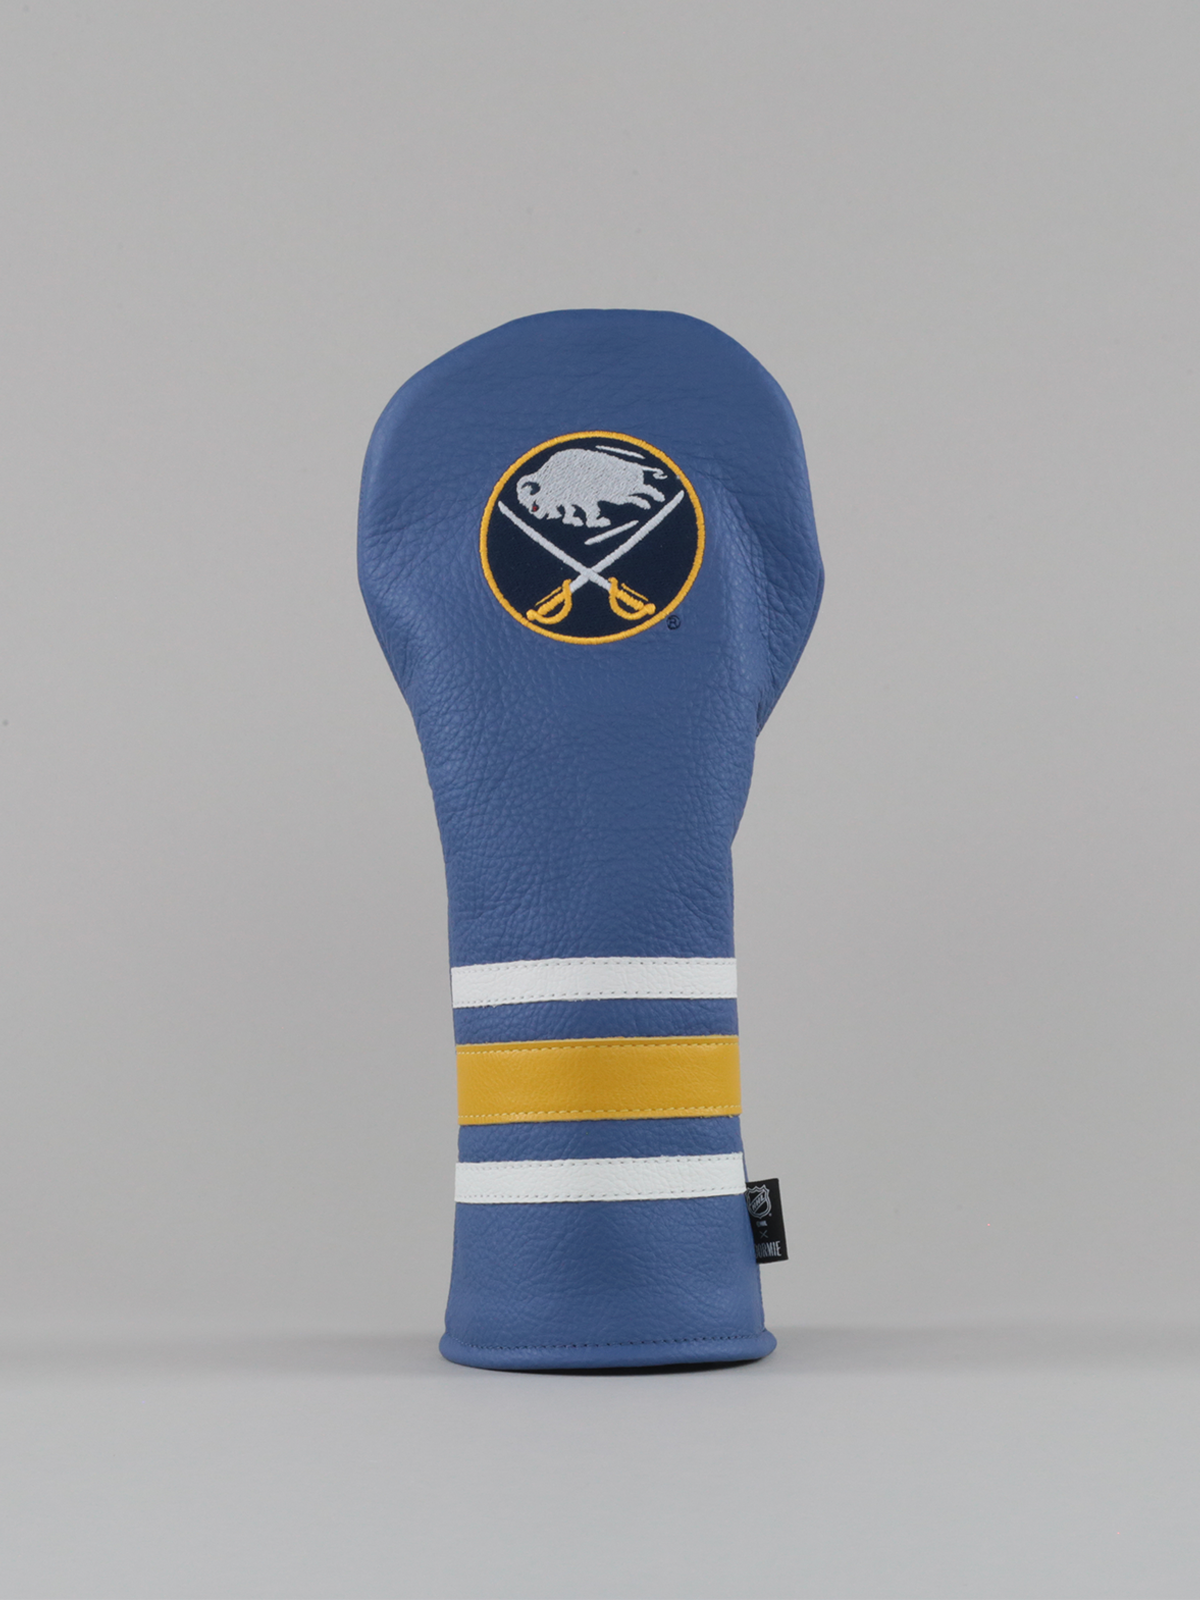 Sabres Goaltenders and Custom Pads – Two in the Box